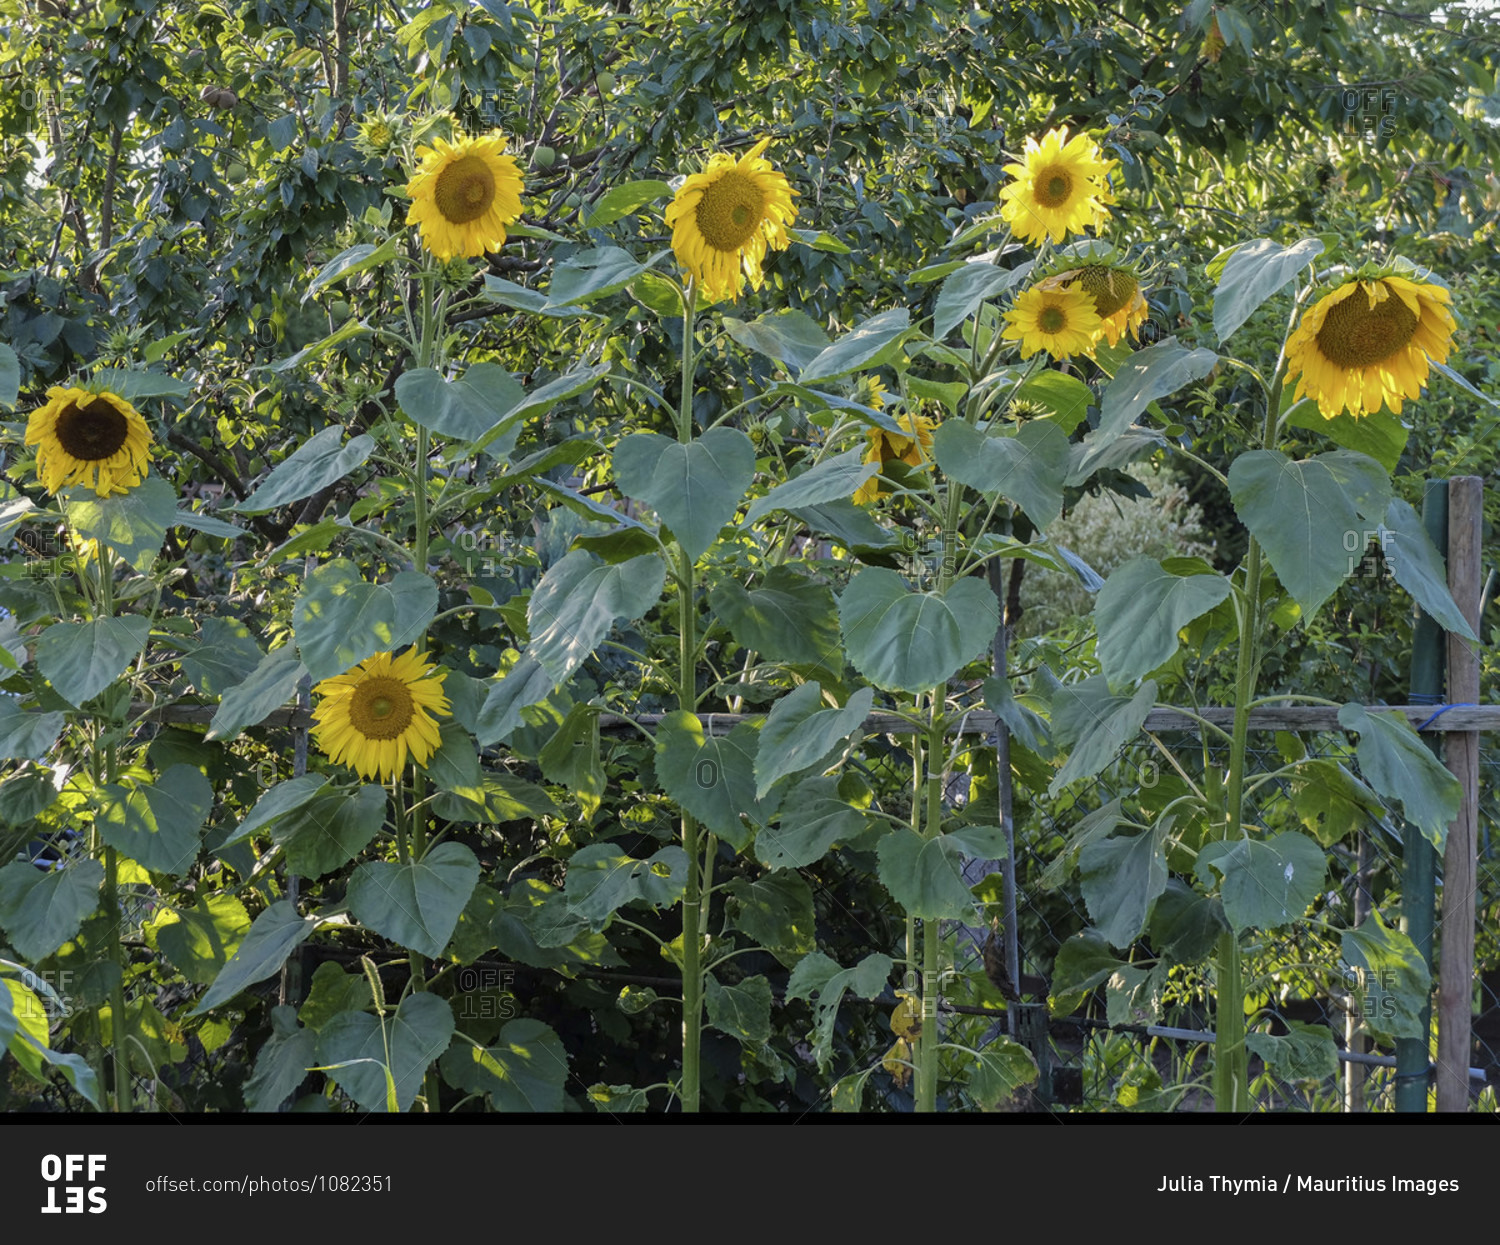 Sunflowers (Helianthus annuus) grow in the row as a screen